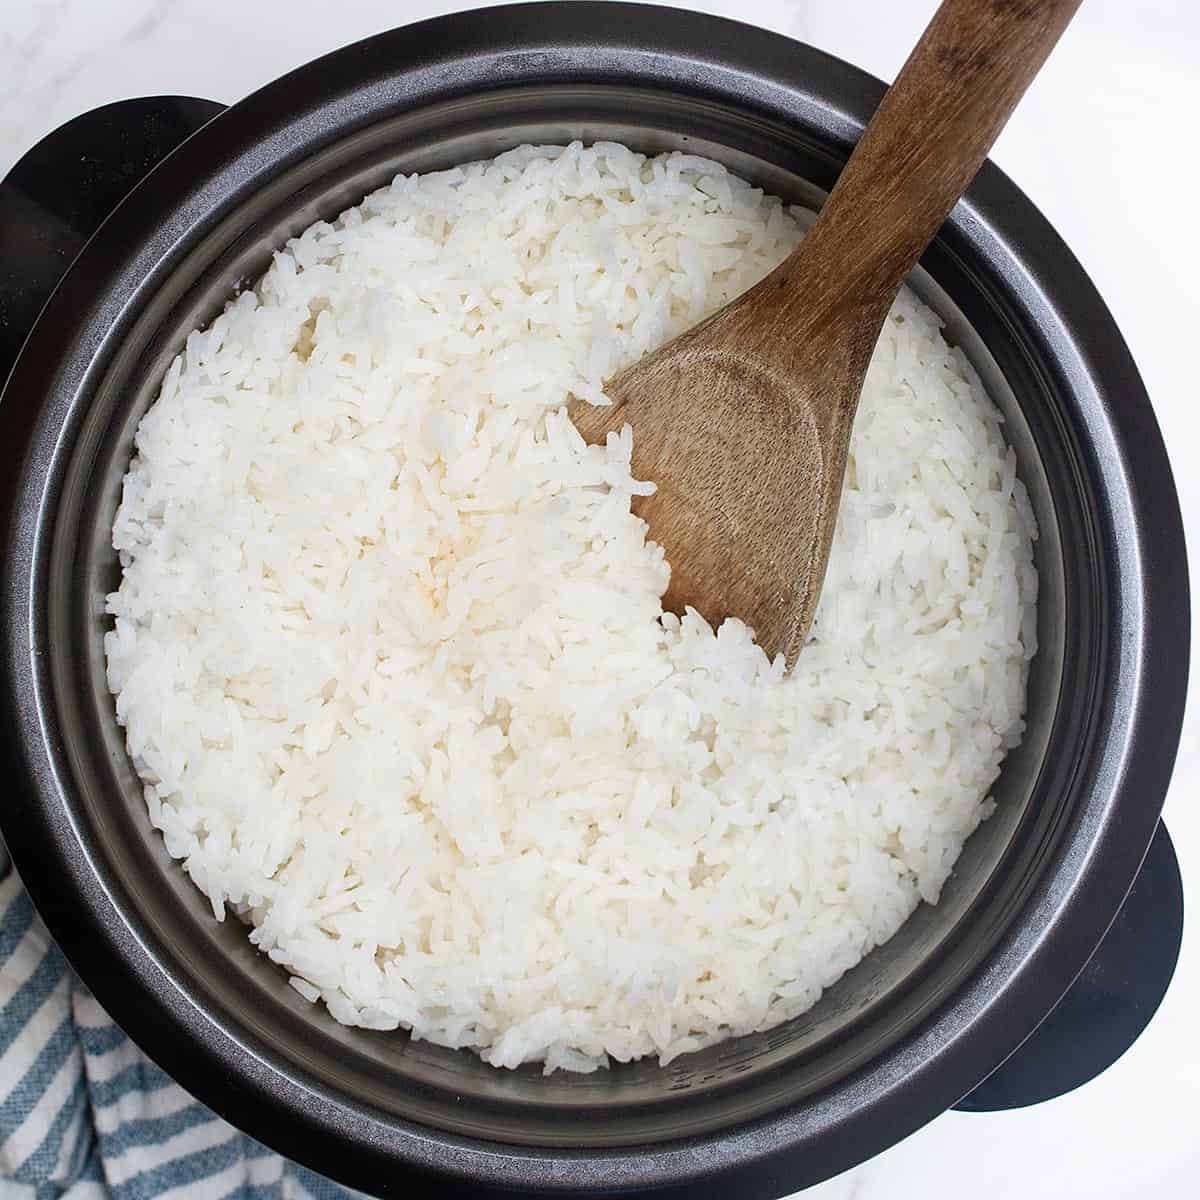 How Long Should I Cook Rice In A Rice Cooker